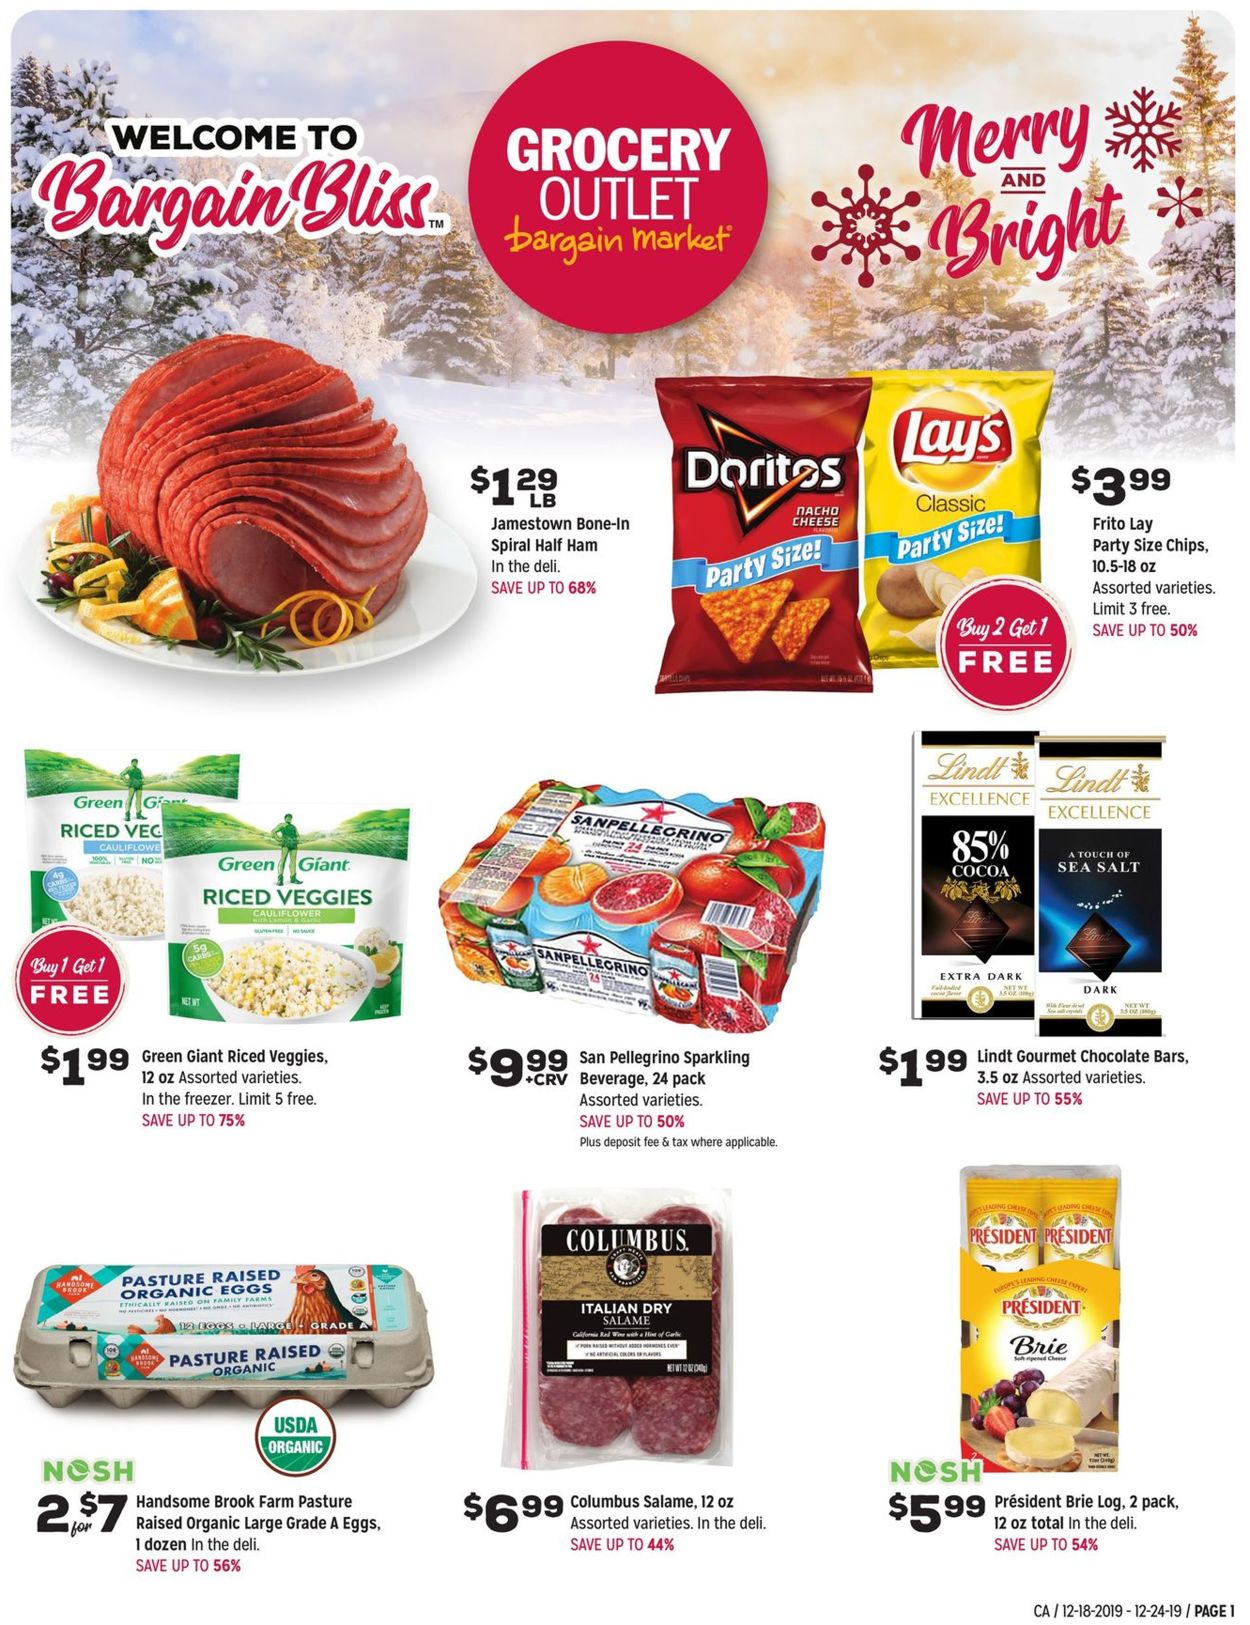 Grocery Outlet - Holiday Ad 2019 Weekly Ad Circular - valid 12/18-12/24/2019